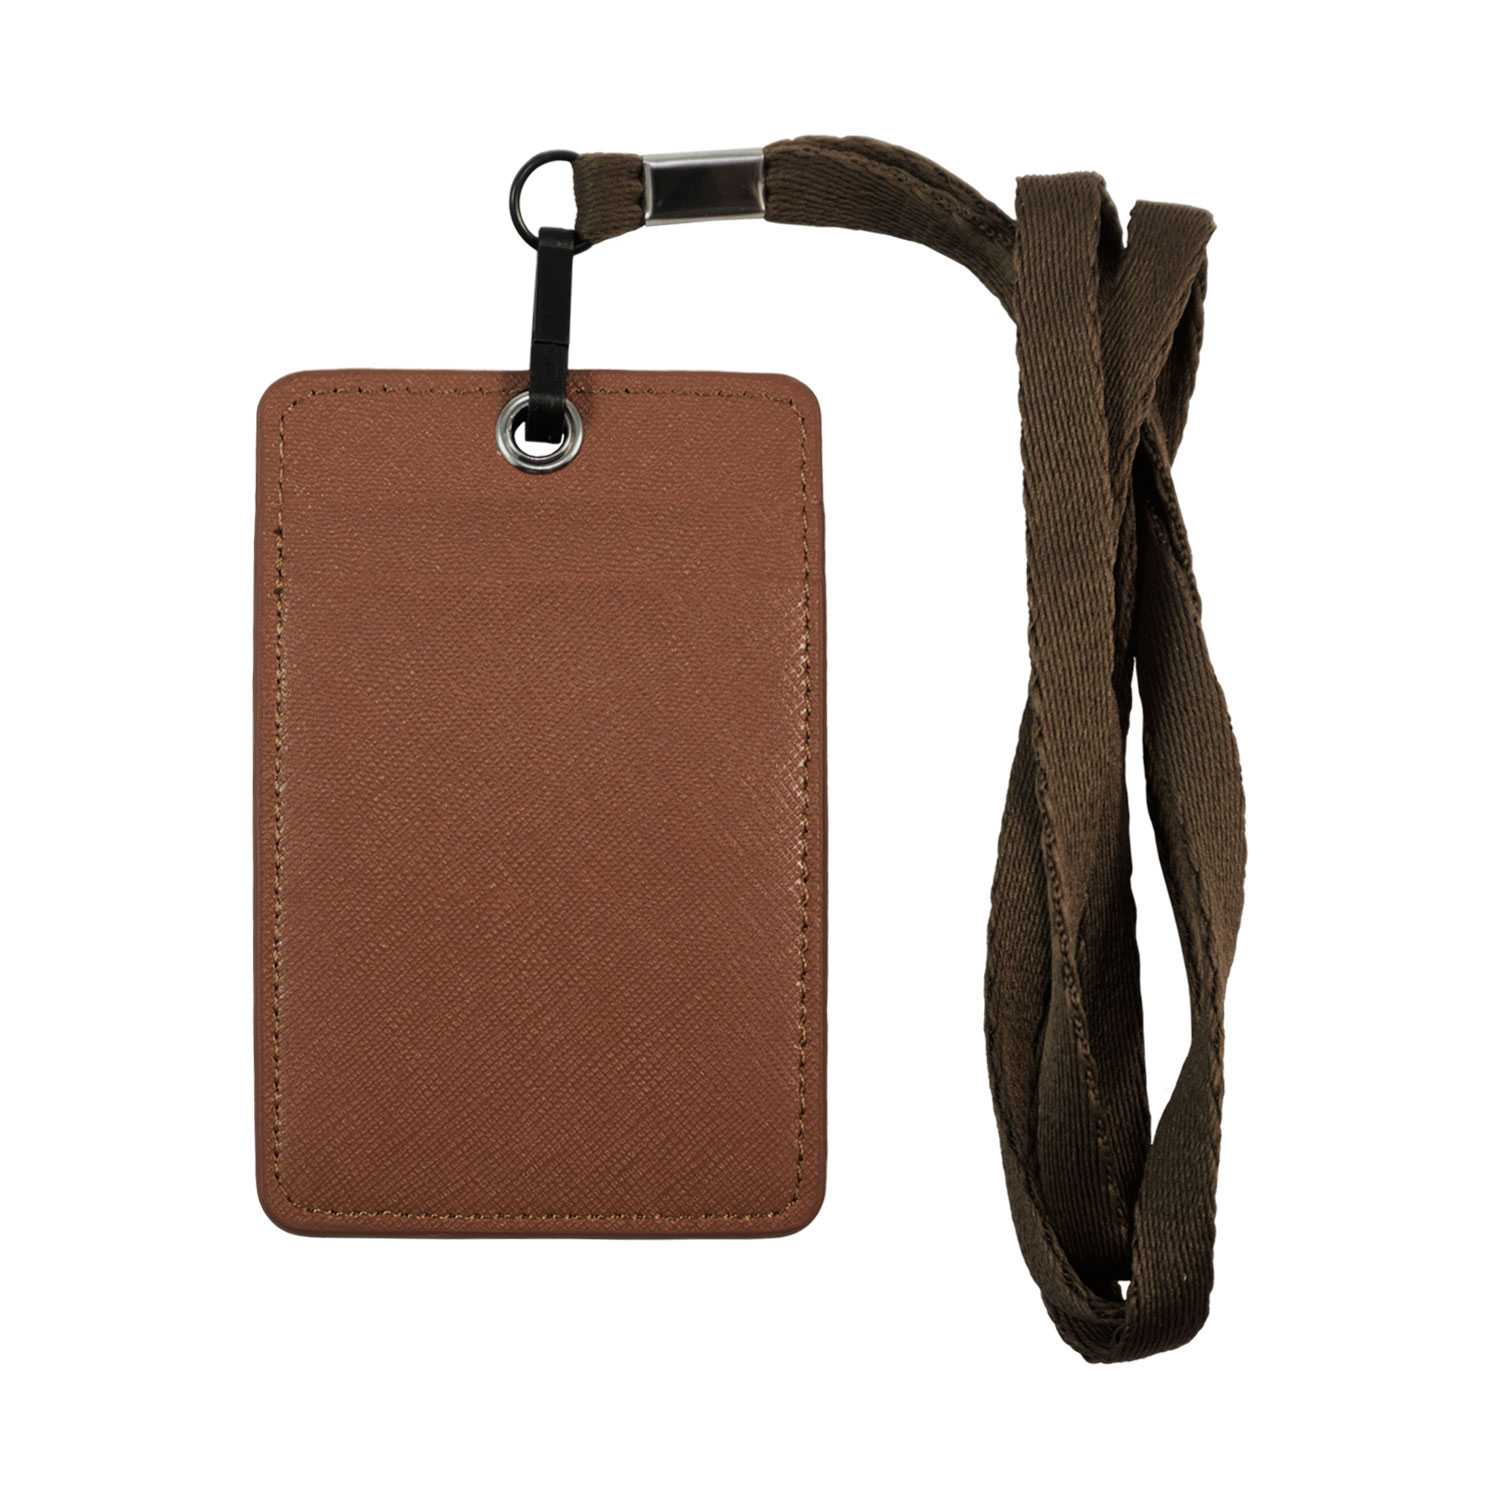 Unisex ID & Credit Cards Holder Wallet with Lanyard - Brown - Zestique